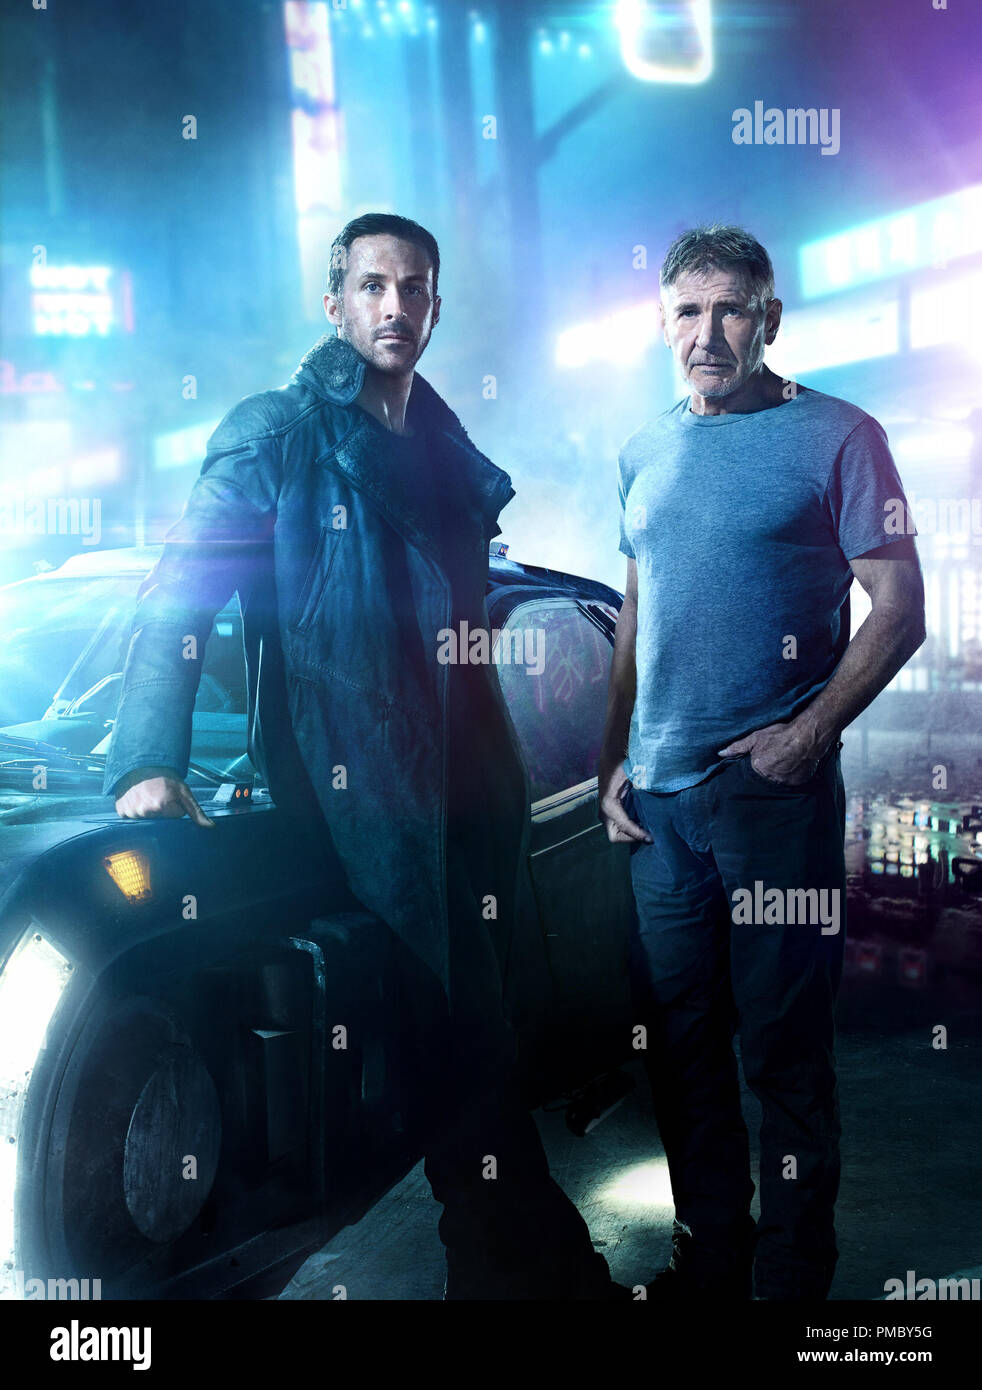 https://c8.alamy.com/comp/PMBY5G/center-l-r-ryan-gosling-as-k-and-harrison-ford-as-rick-deckard-in-alcon-entertainments-action-thriller-blade-runner-2049-a-warner-bros-pictures-and-sony-pictures-entertainment-release-domestic-distribution-by-warner-bros-pictures-and-international-distribution-by-sony-pictures-2017-PMBY5G.jpg